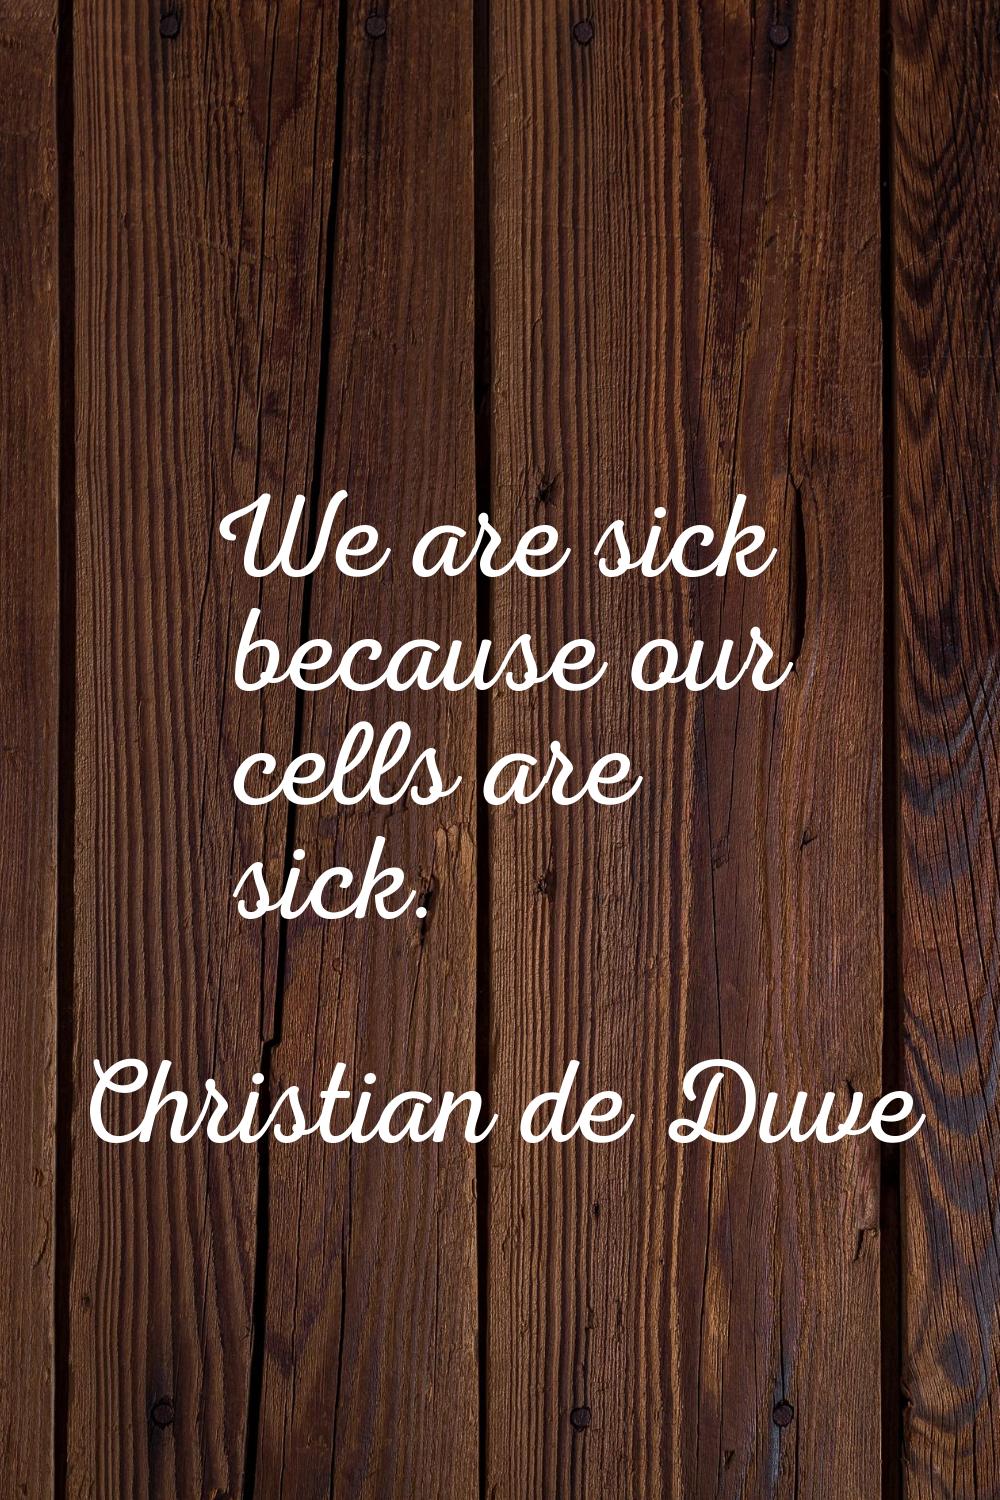 We are sick because our cells are sick.